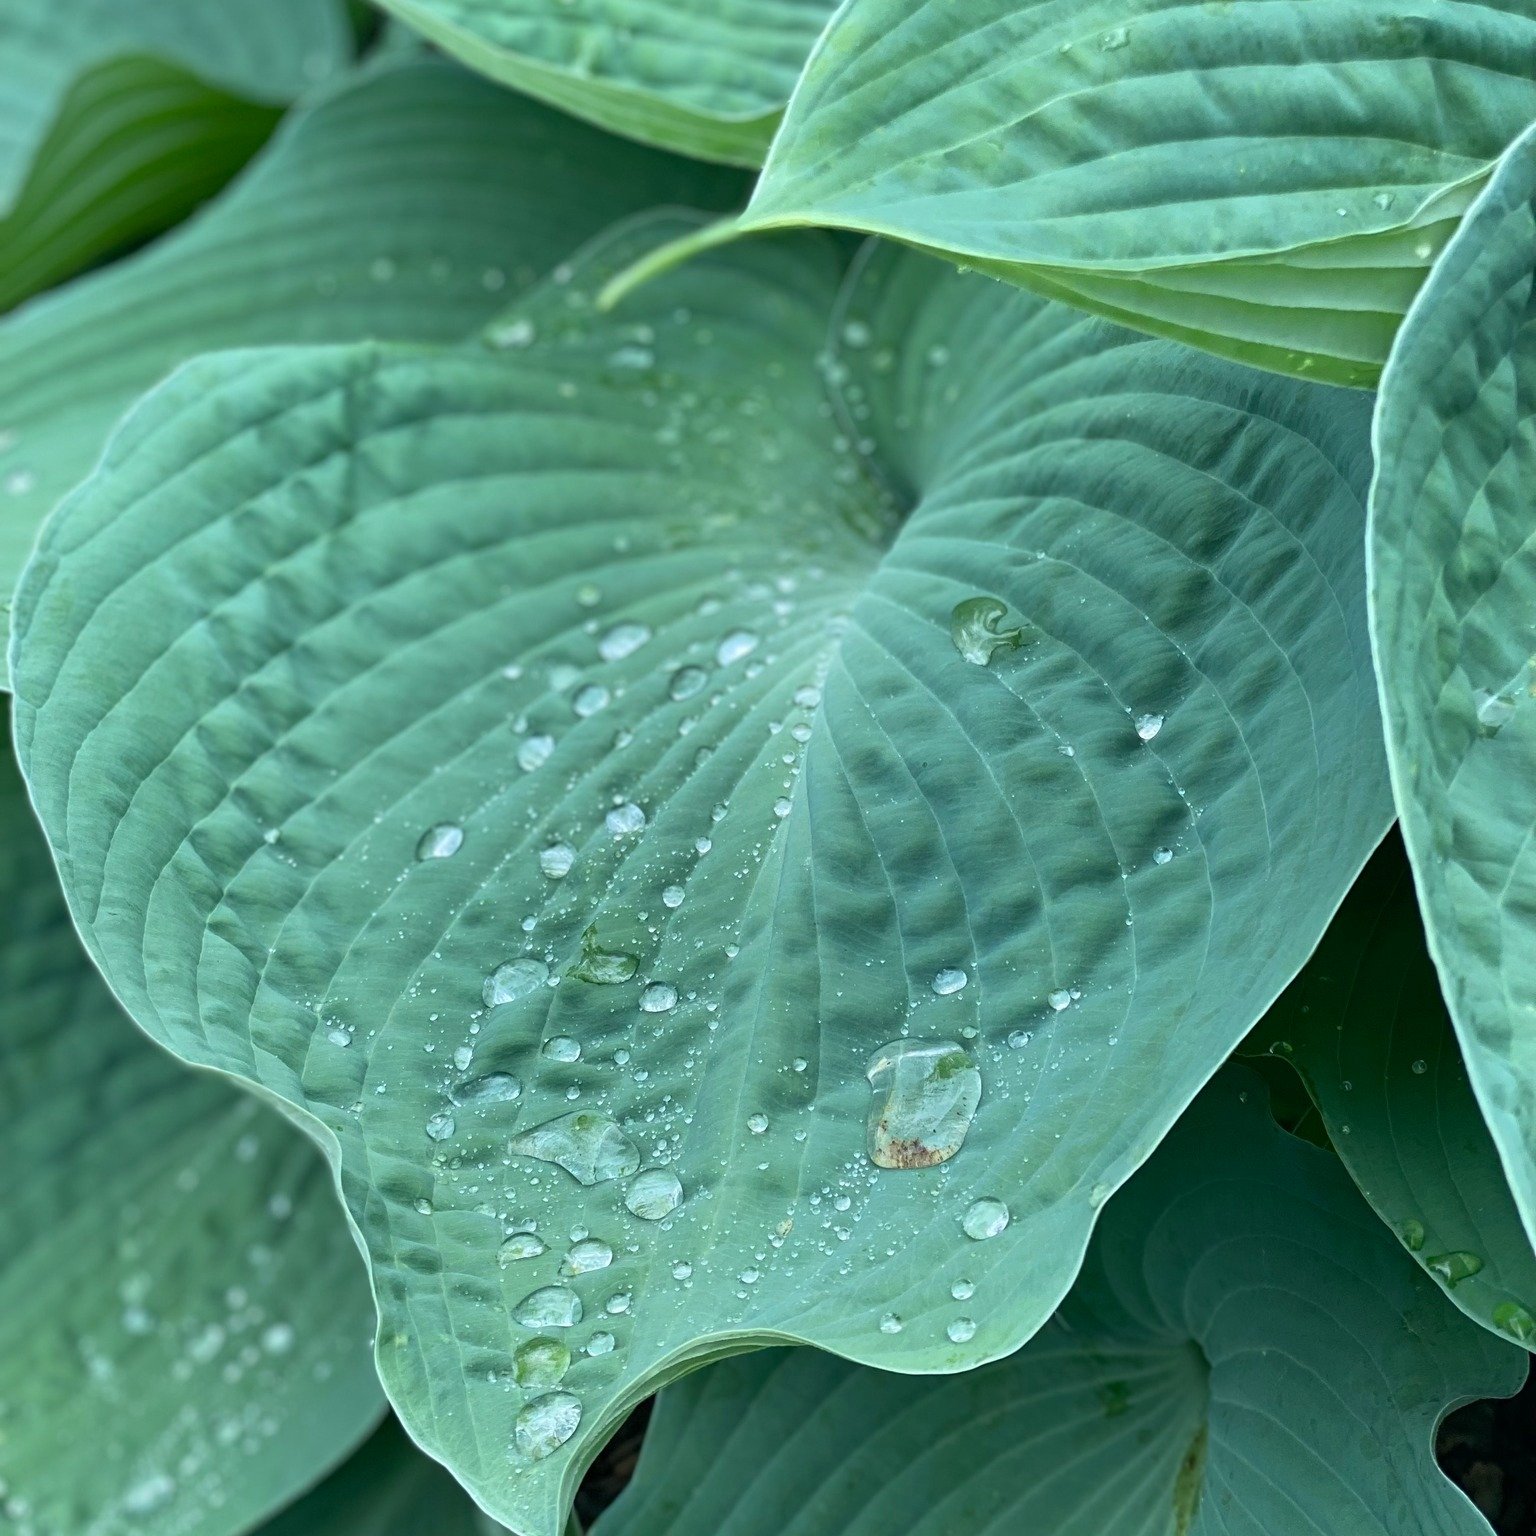 🌿 Transform your landscaping effortlessly with hostas! Here's why they're a must-have:

Low maintenance ✔️
Versatile designs ✔️
Thrives in shade ✔️
Erosion control ✔️
Year-round beauty ✔️
Wildlife-friendly ✔️
Add hostas for easy elegance in your gar